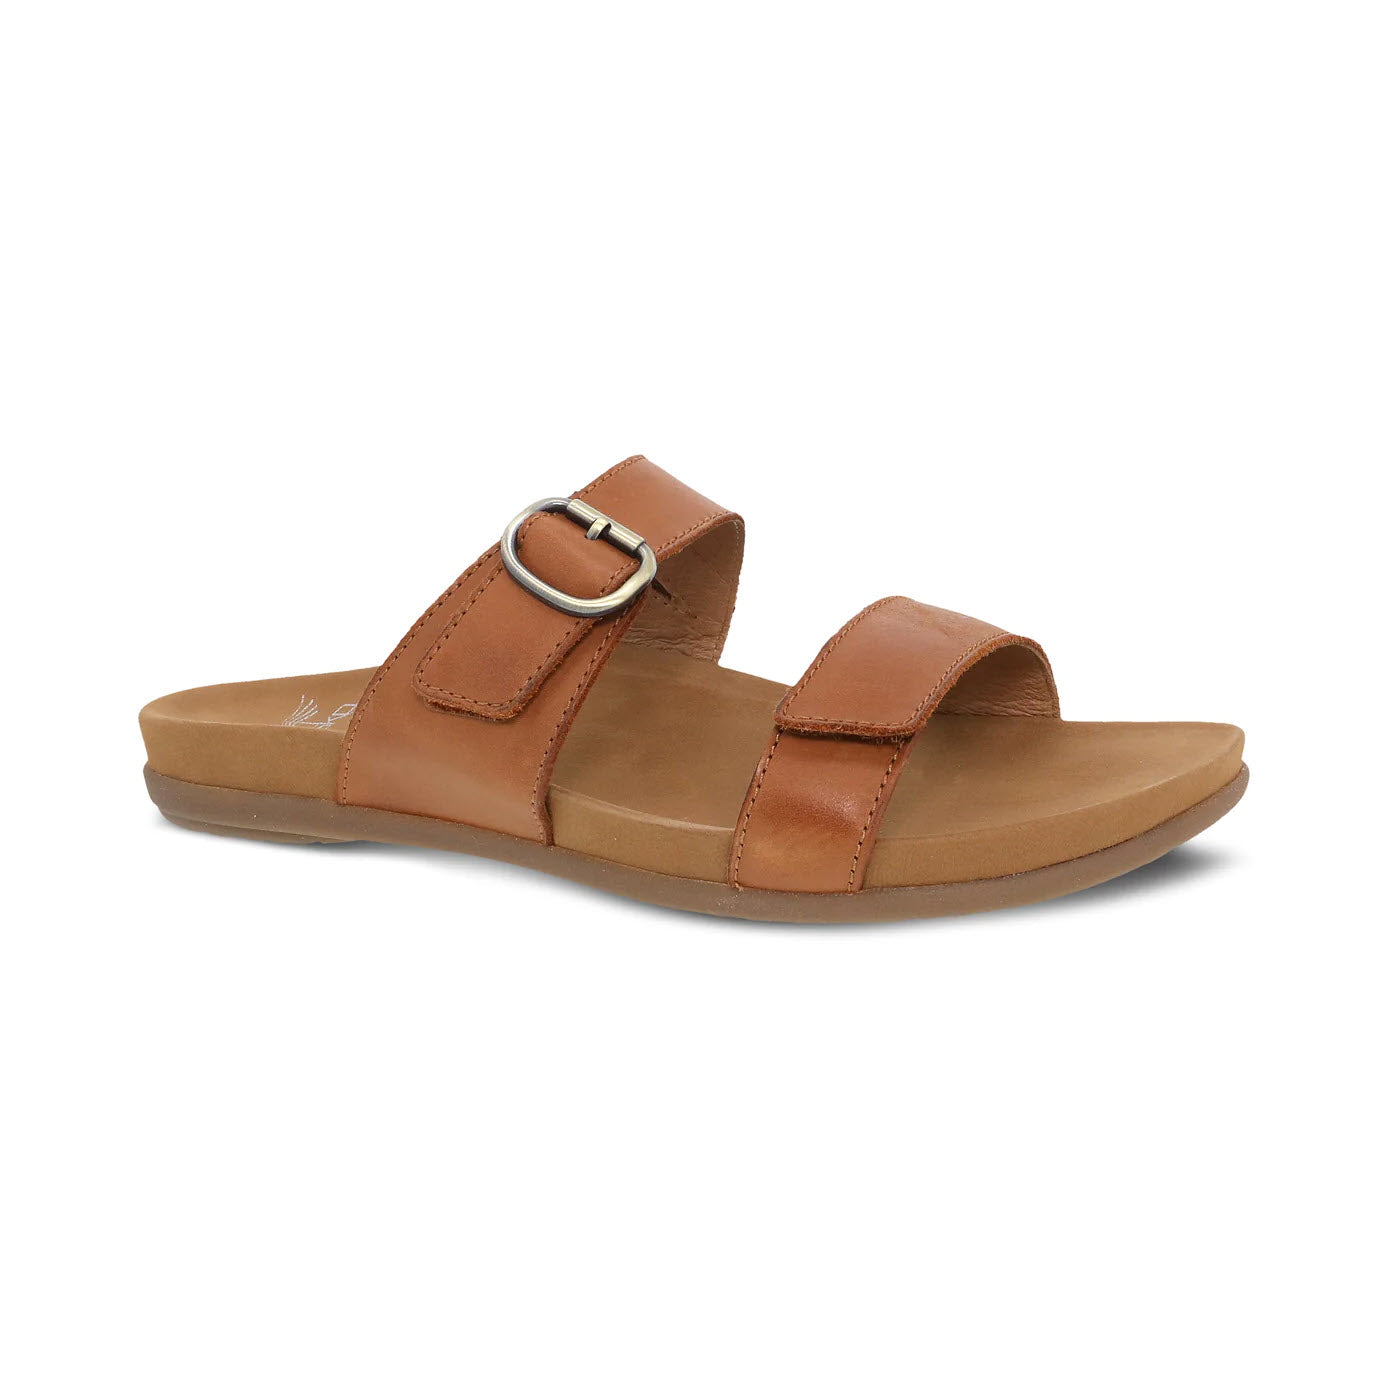 A Dansko Justine Luggage - Womens slide sandal with two straps and a buckle, isolated on a white background.